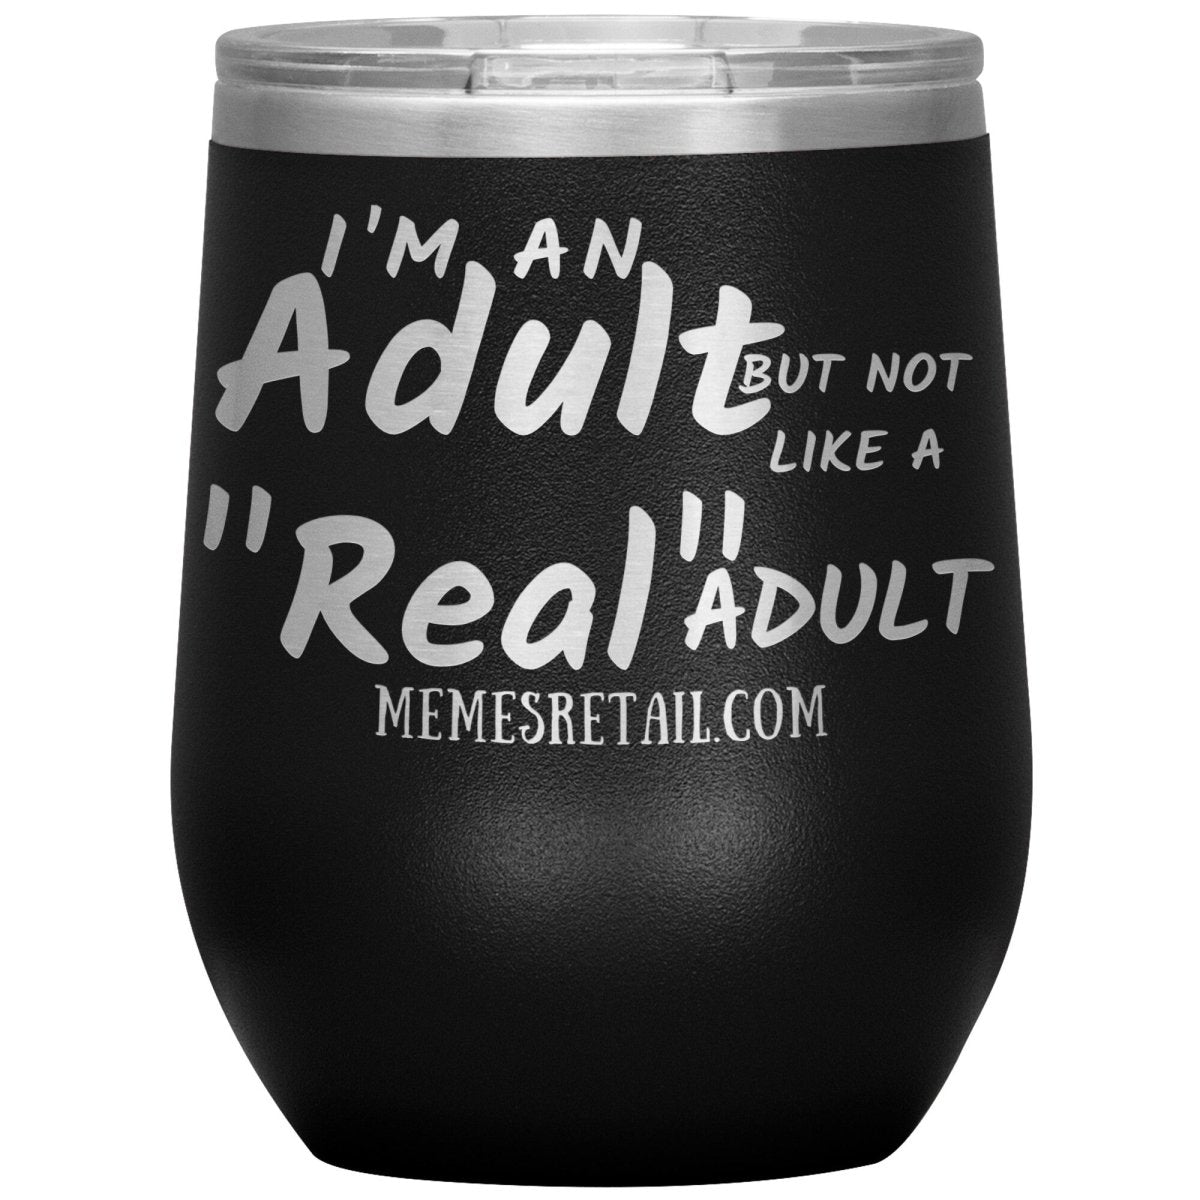 I'm an adult, but not like a "real" adult Tumblers, 12oz Wine Insulated Tumbler / Black - MemesRetail.com